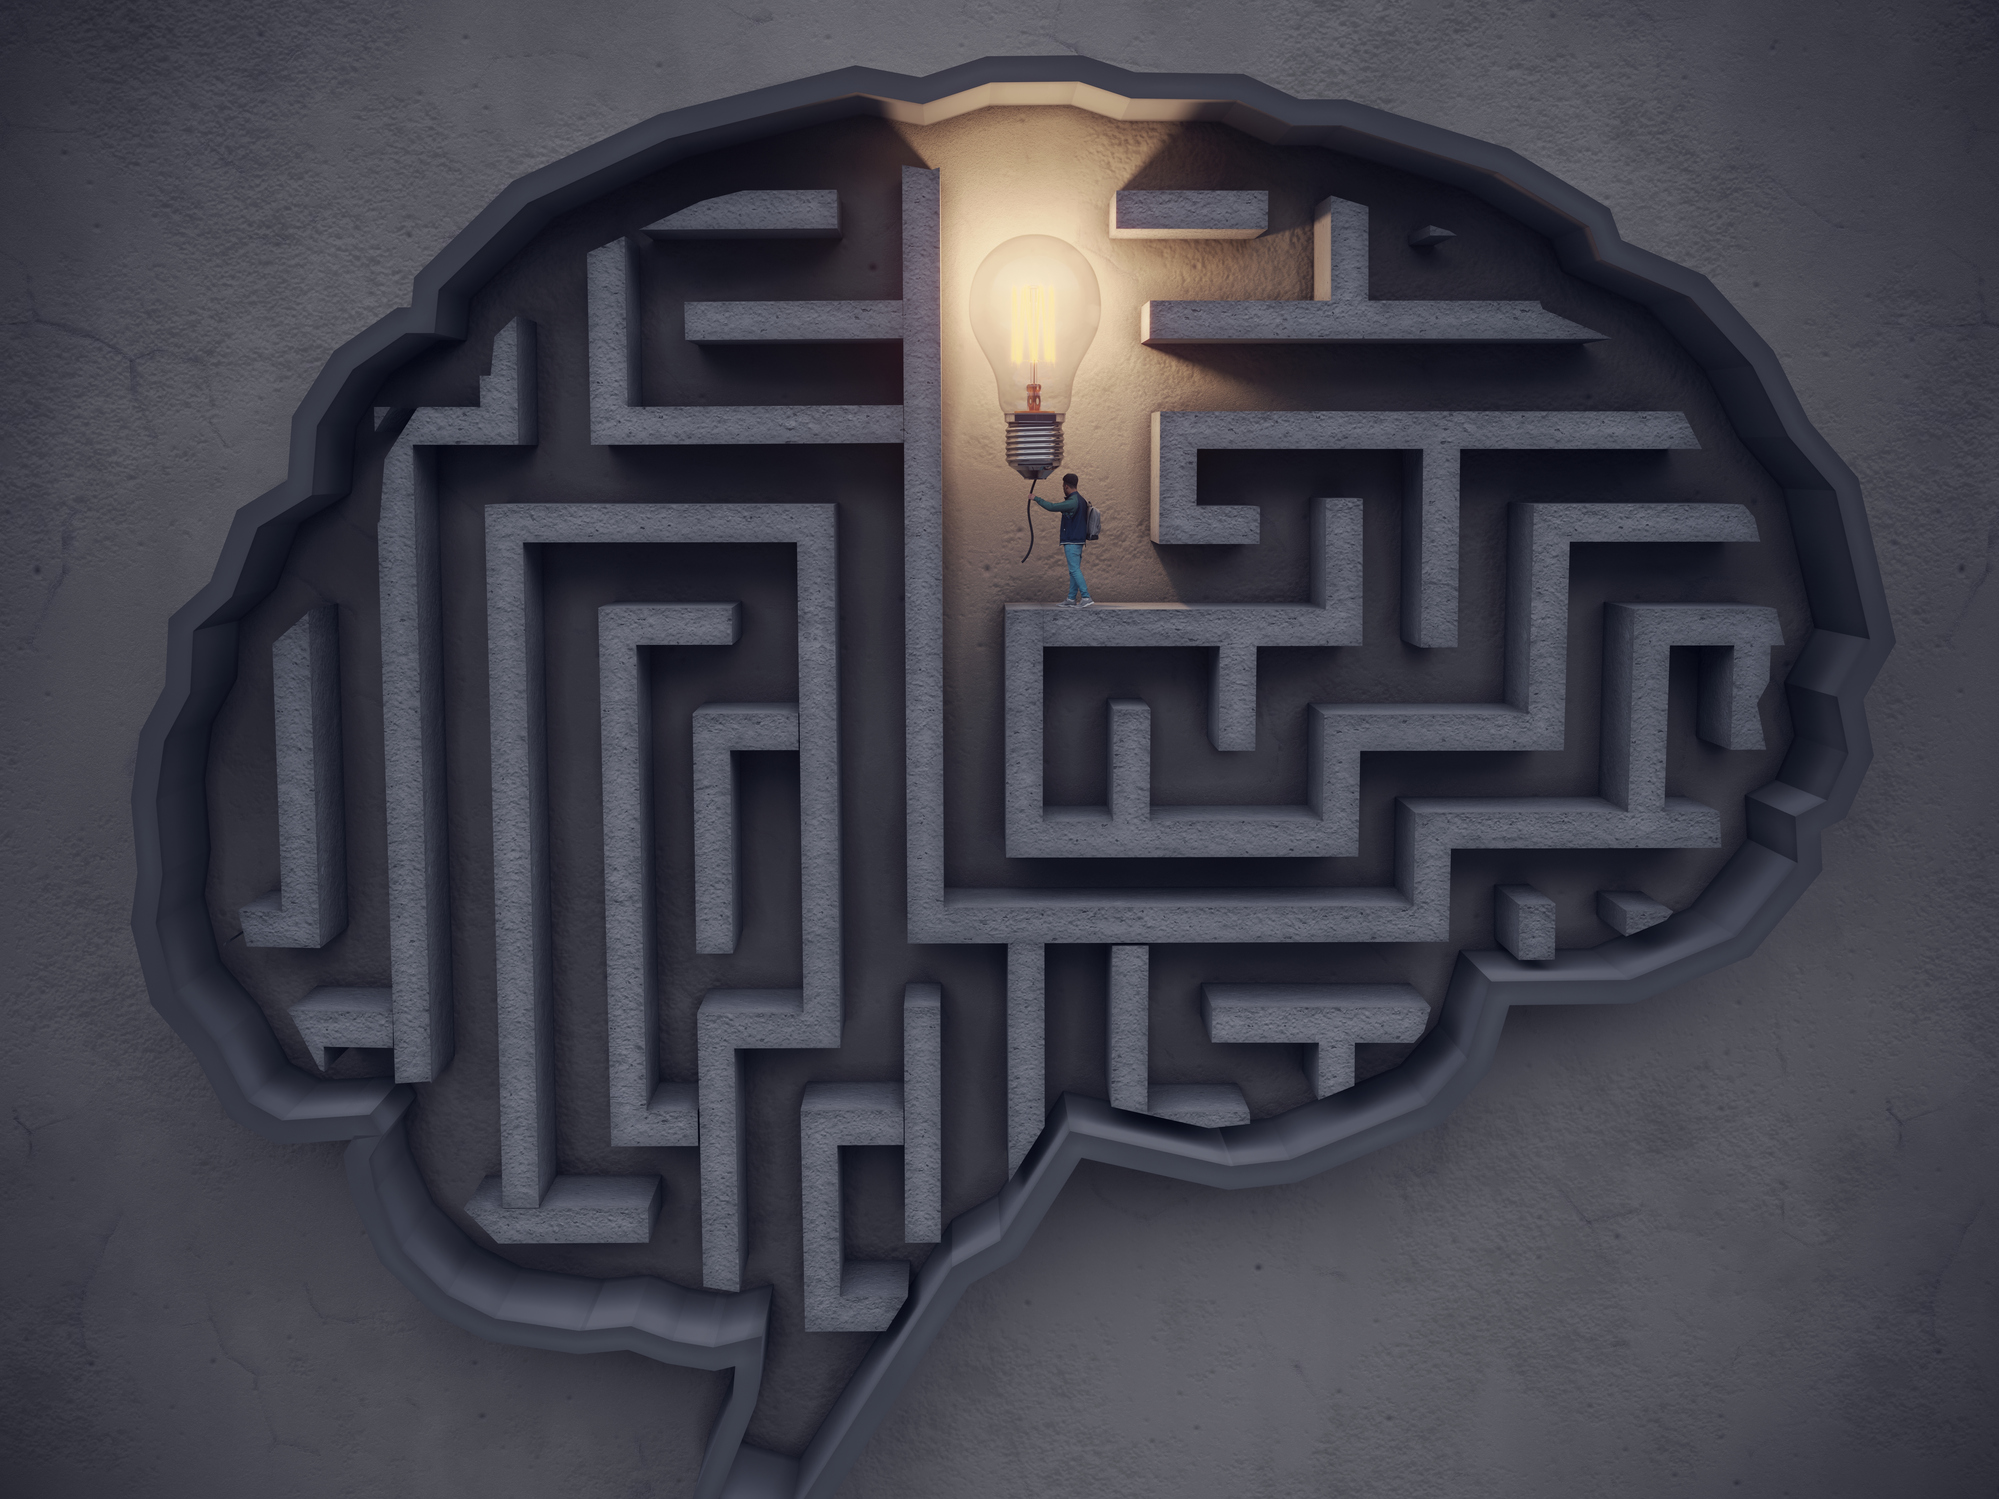 Big Idea Concept, The man turns on the lightbulb in the maze-shaped brain